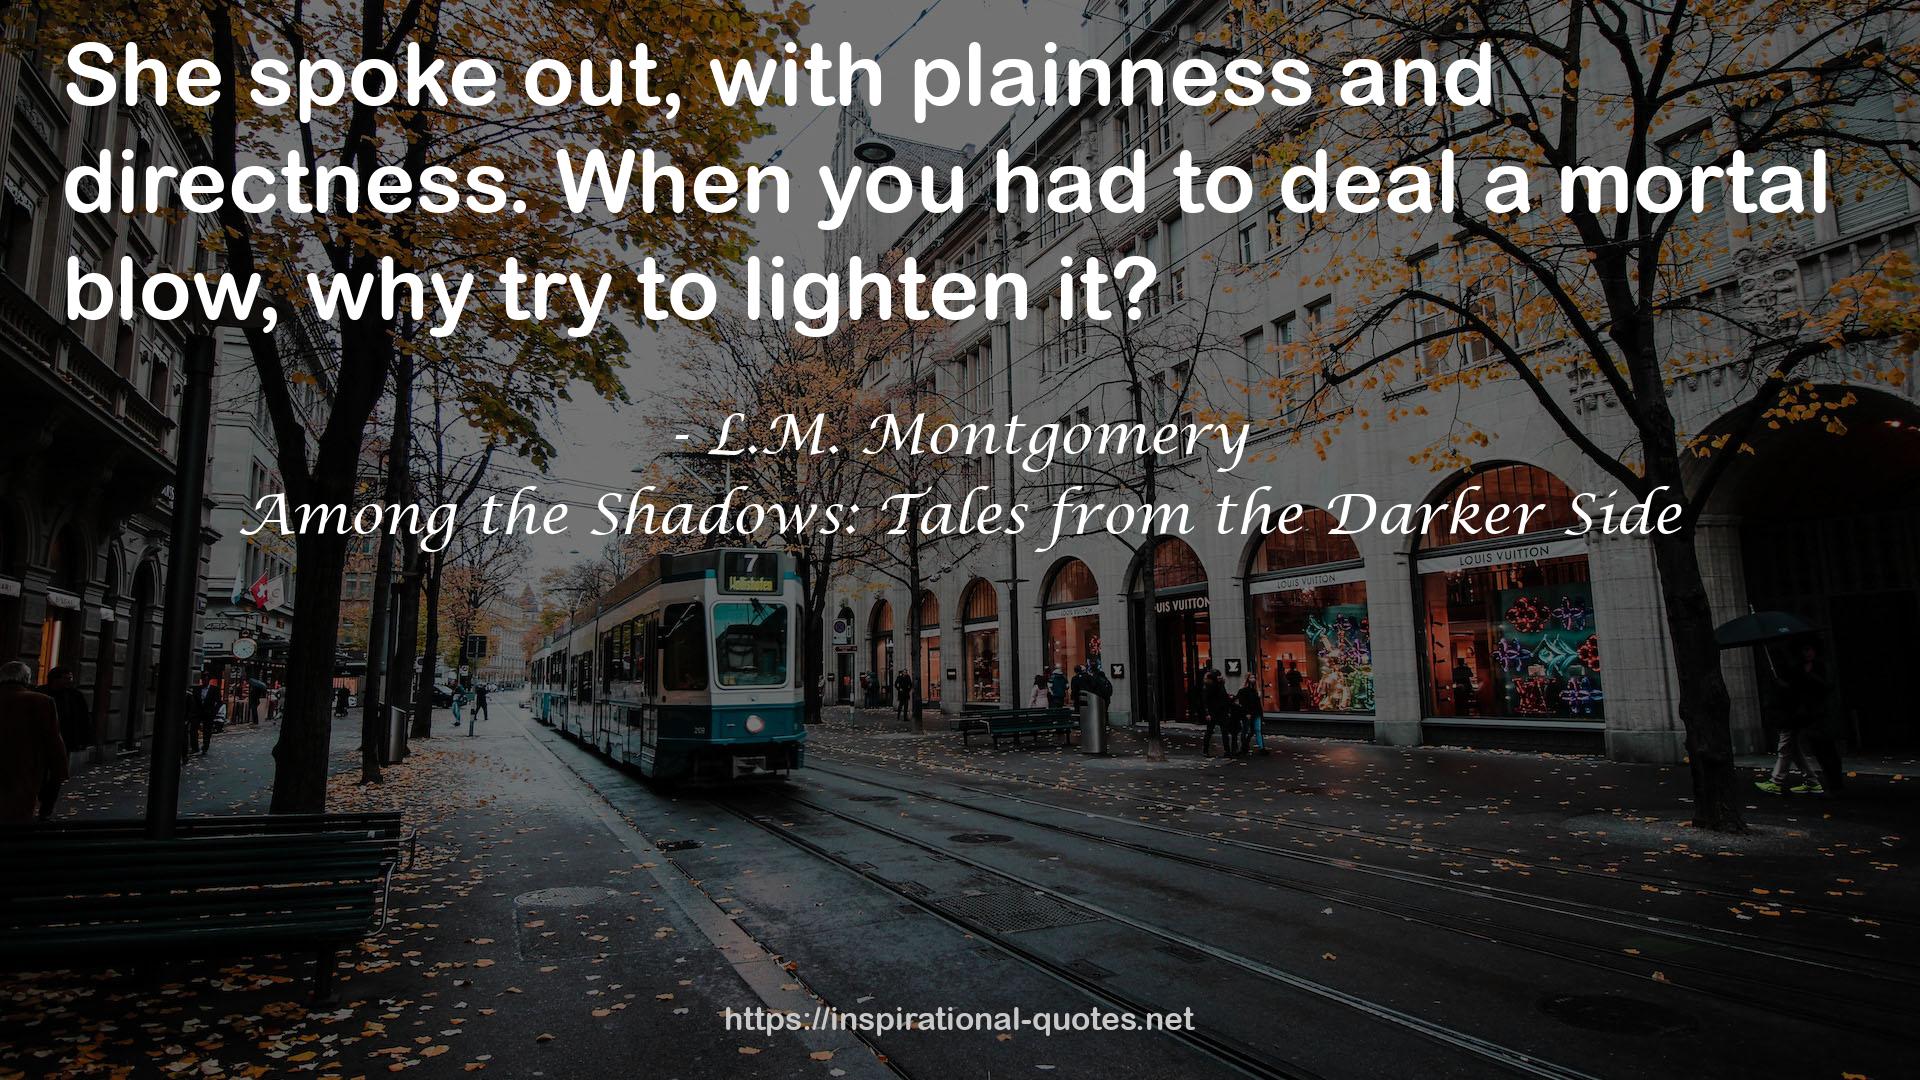 Among the Shadows: Tales from the Darker Side QUOTES